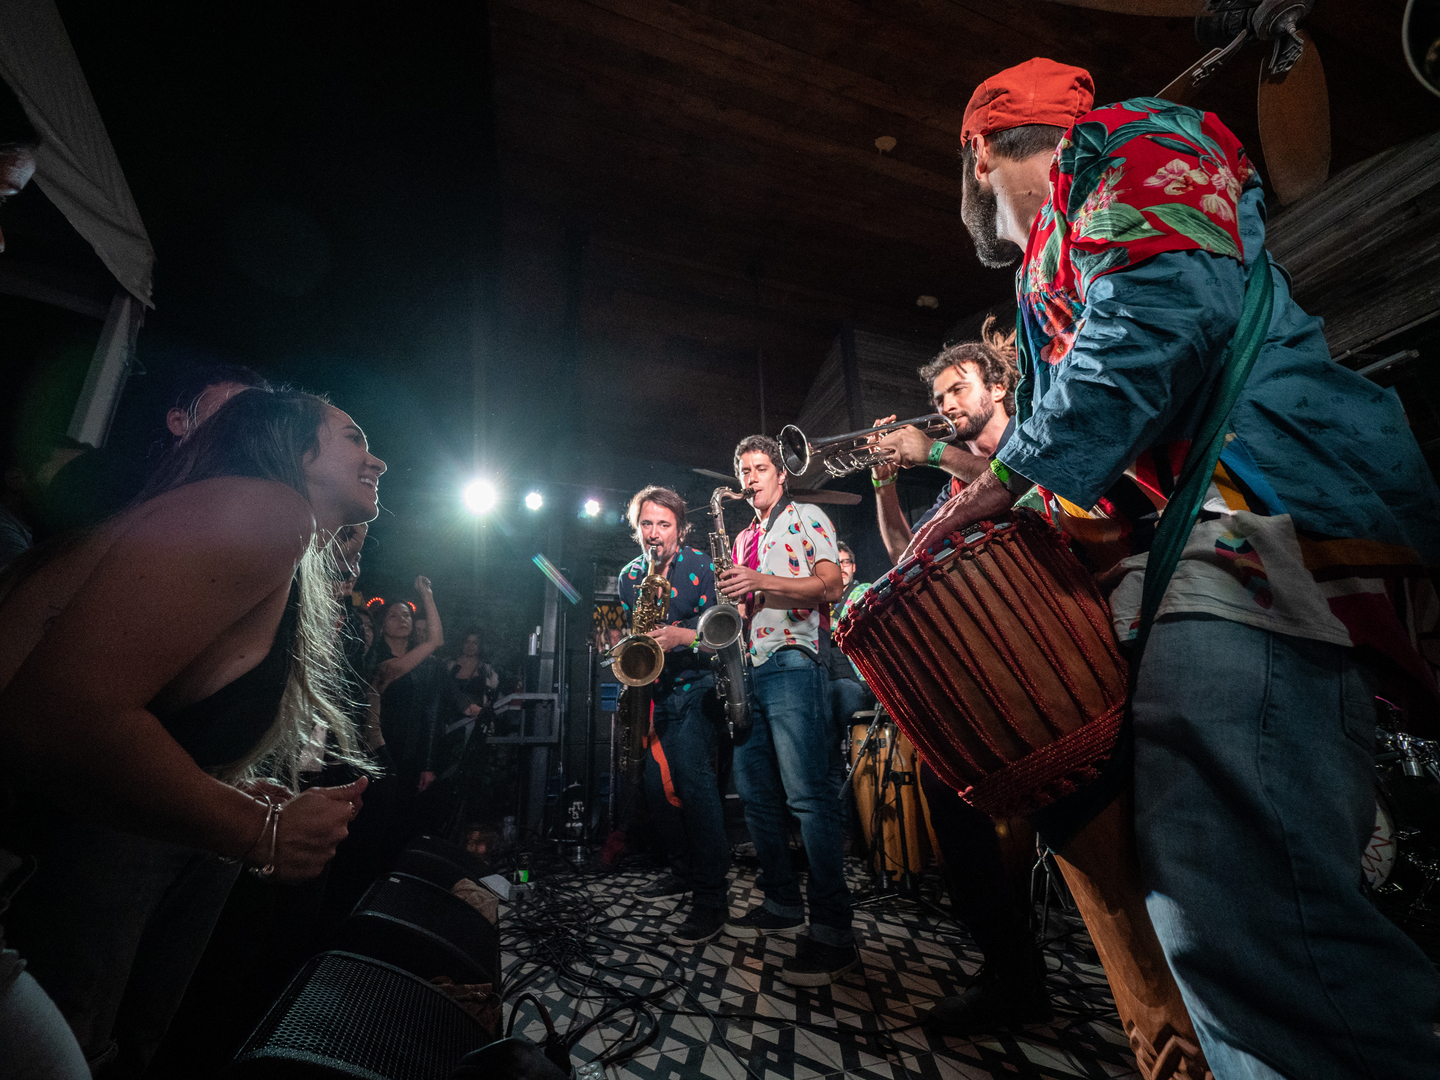 Bixiga 70 at Lucille, presented by Brasil Music Club – Photo by Caleb Pickens